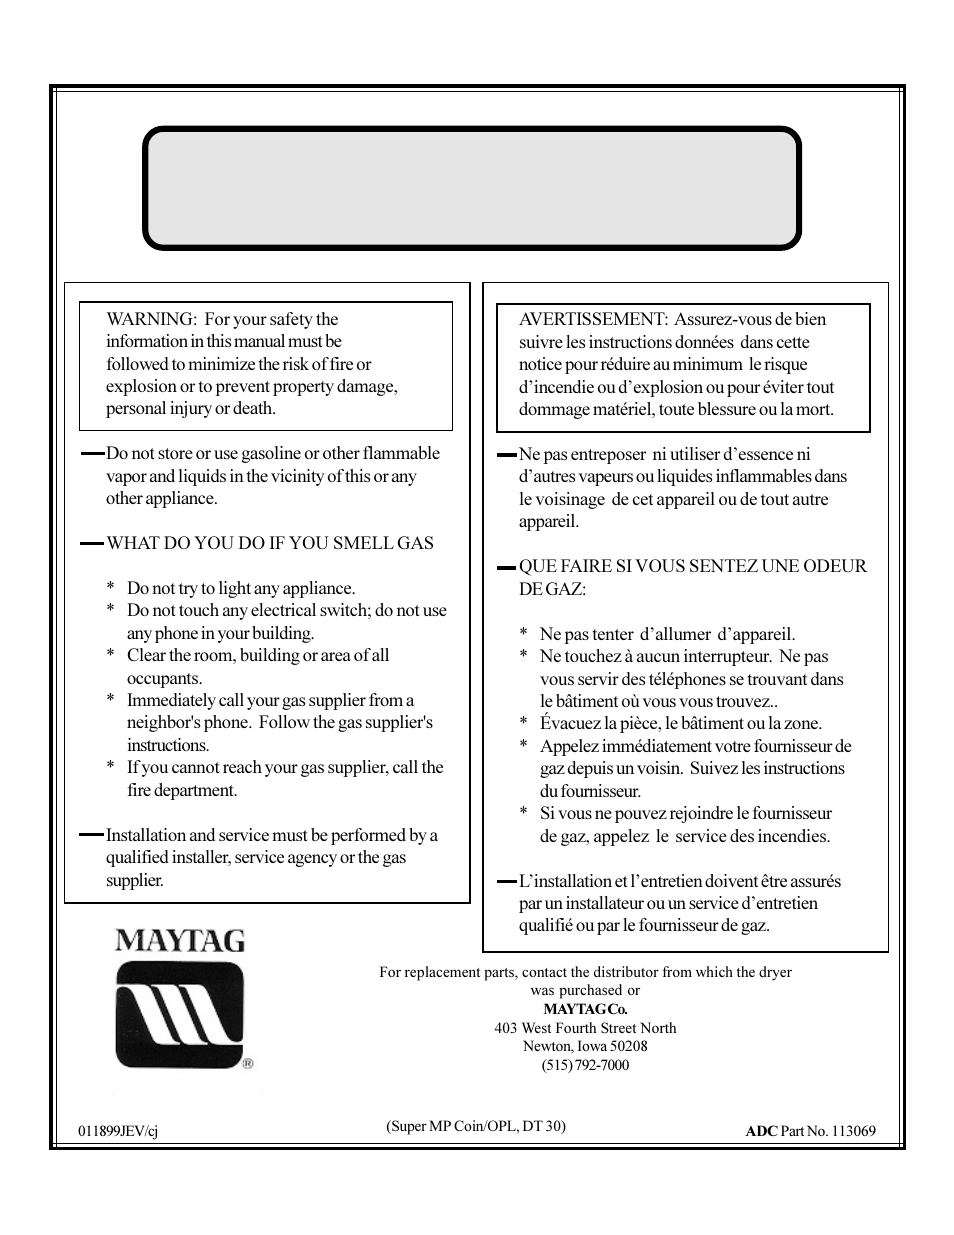 Maytag MDG-30 User Manual | 52 pages